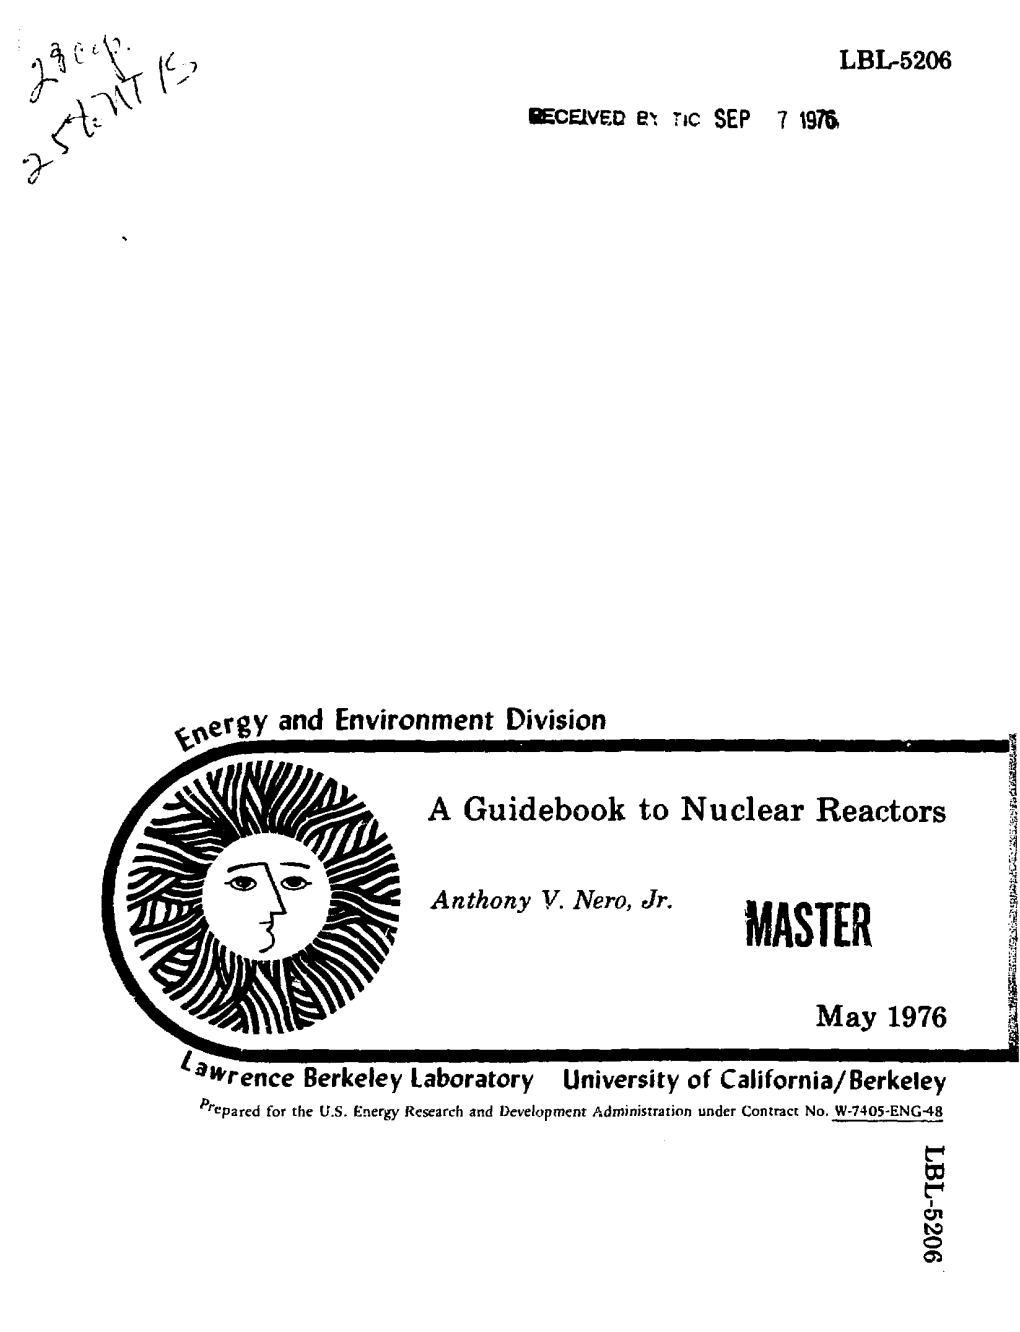 Guidebook to Nuclear Reactors |